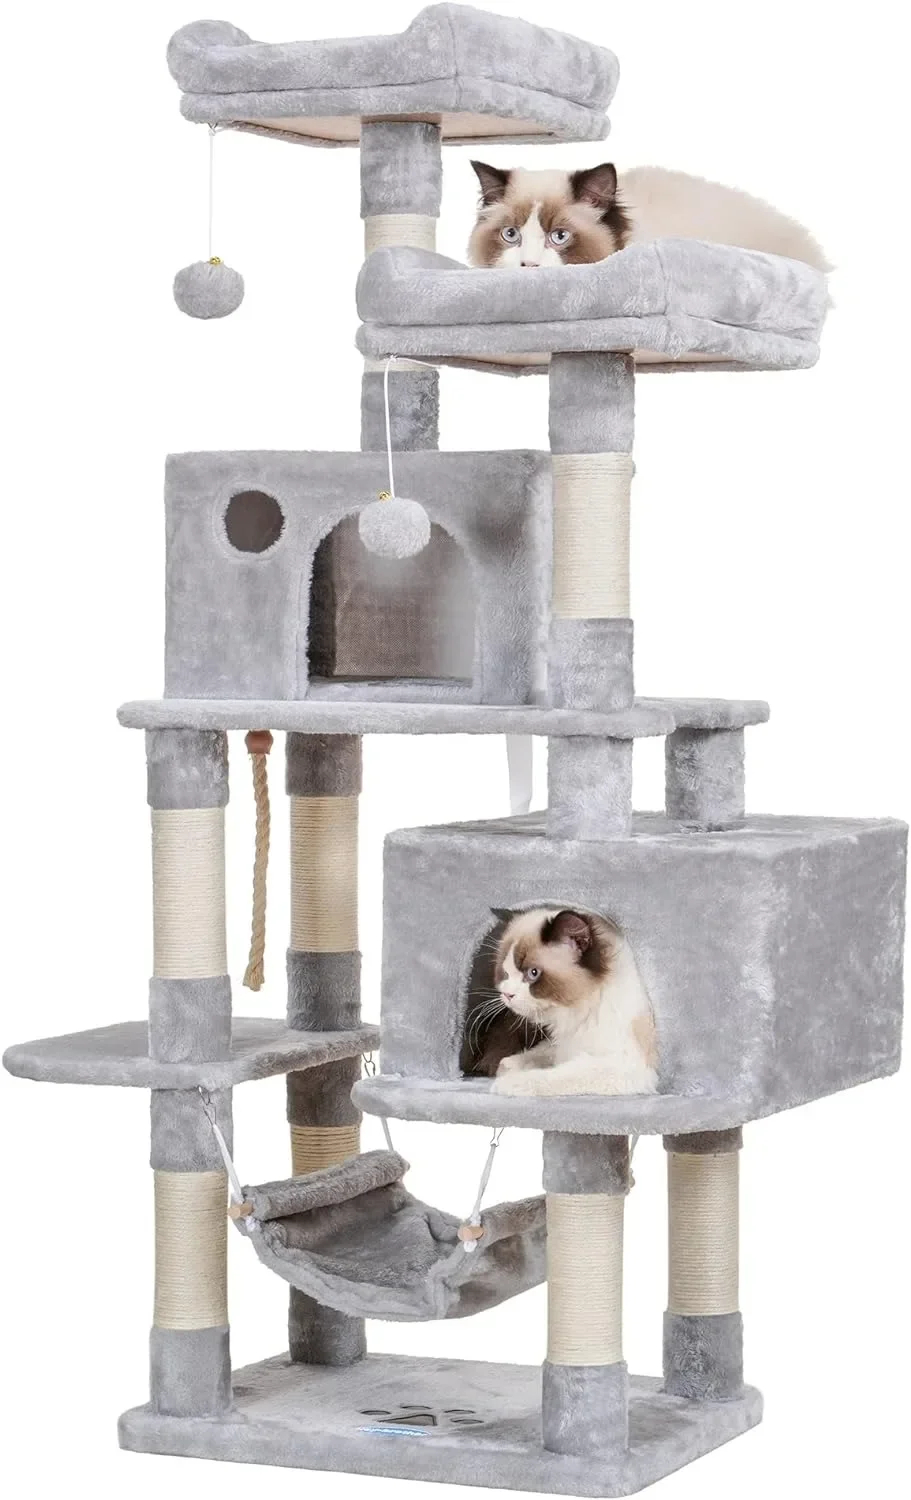 

Multi-Level Cat Tree Condo Furniture with Sisal-Covered Scratching Posts, 2 Plush Condos, Perch Hammock for Kittens, Pets,